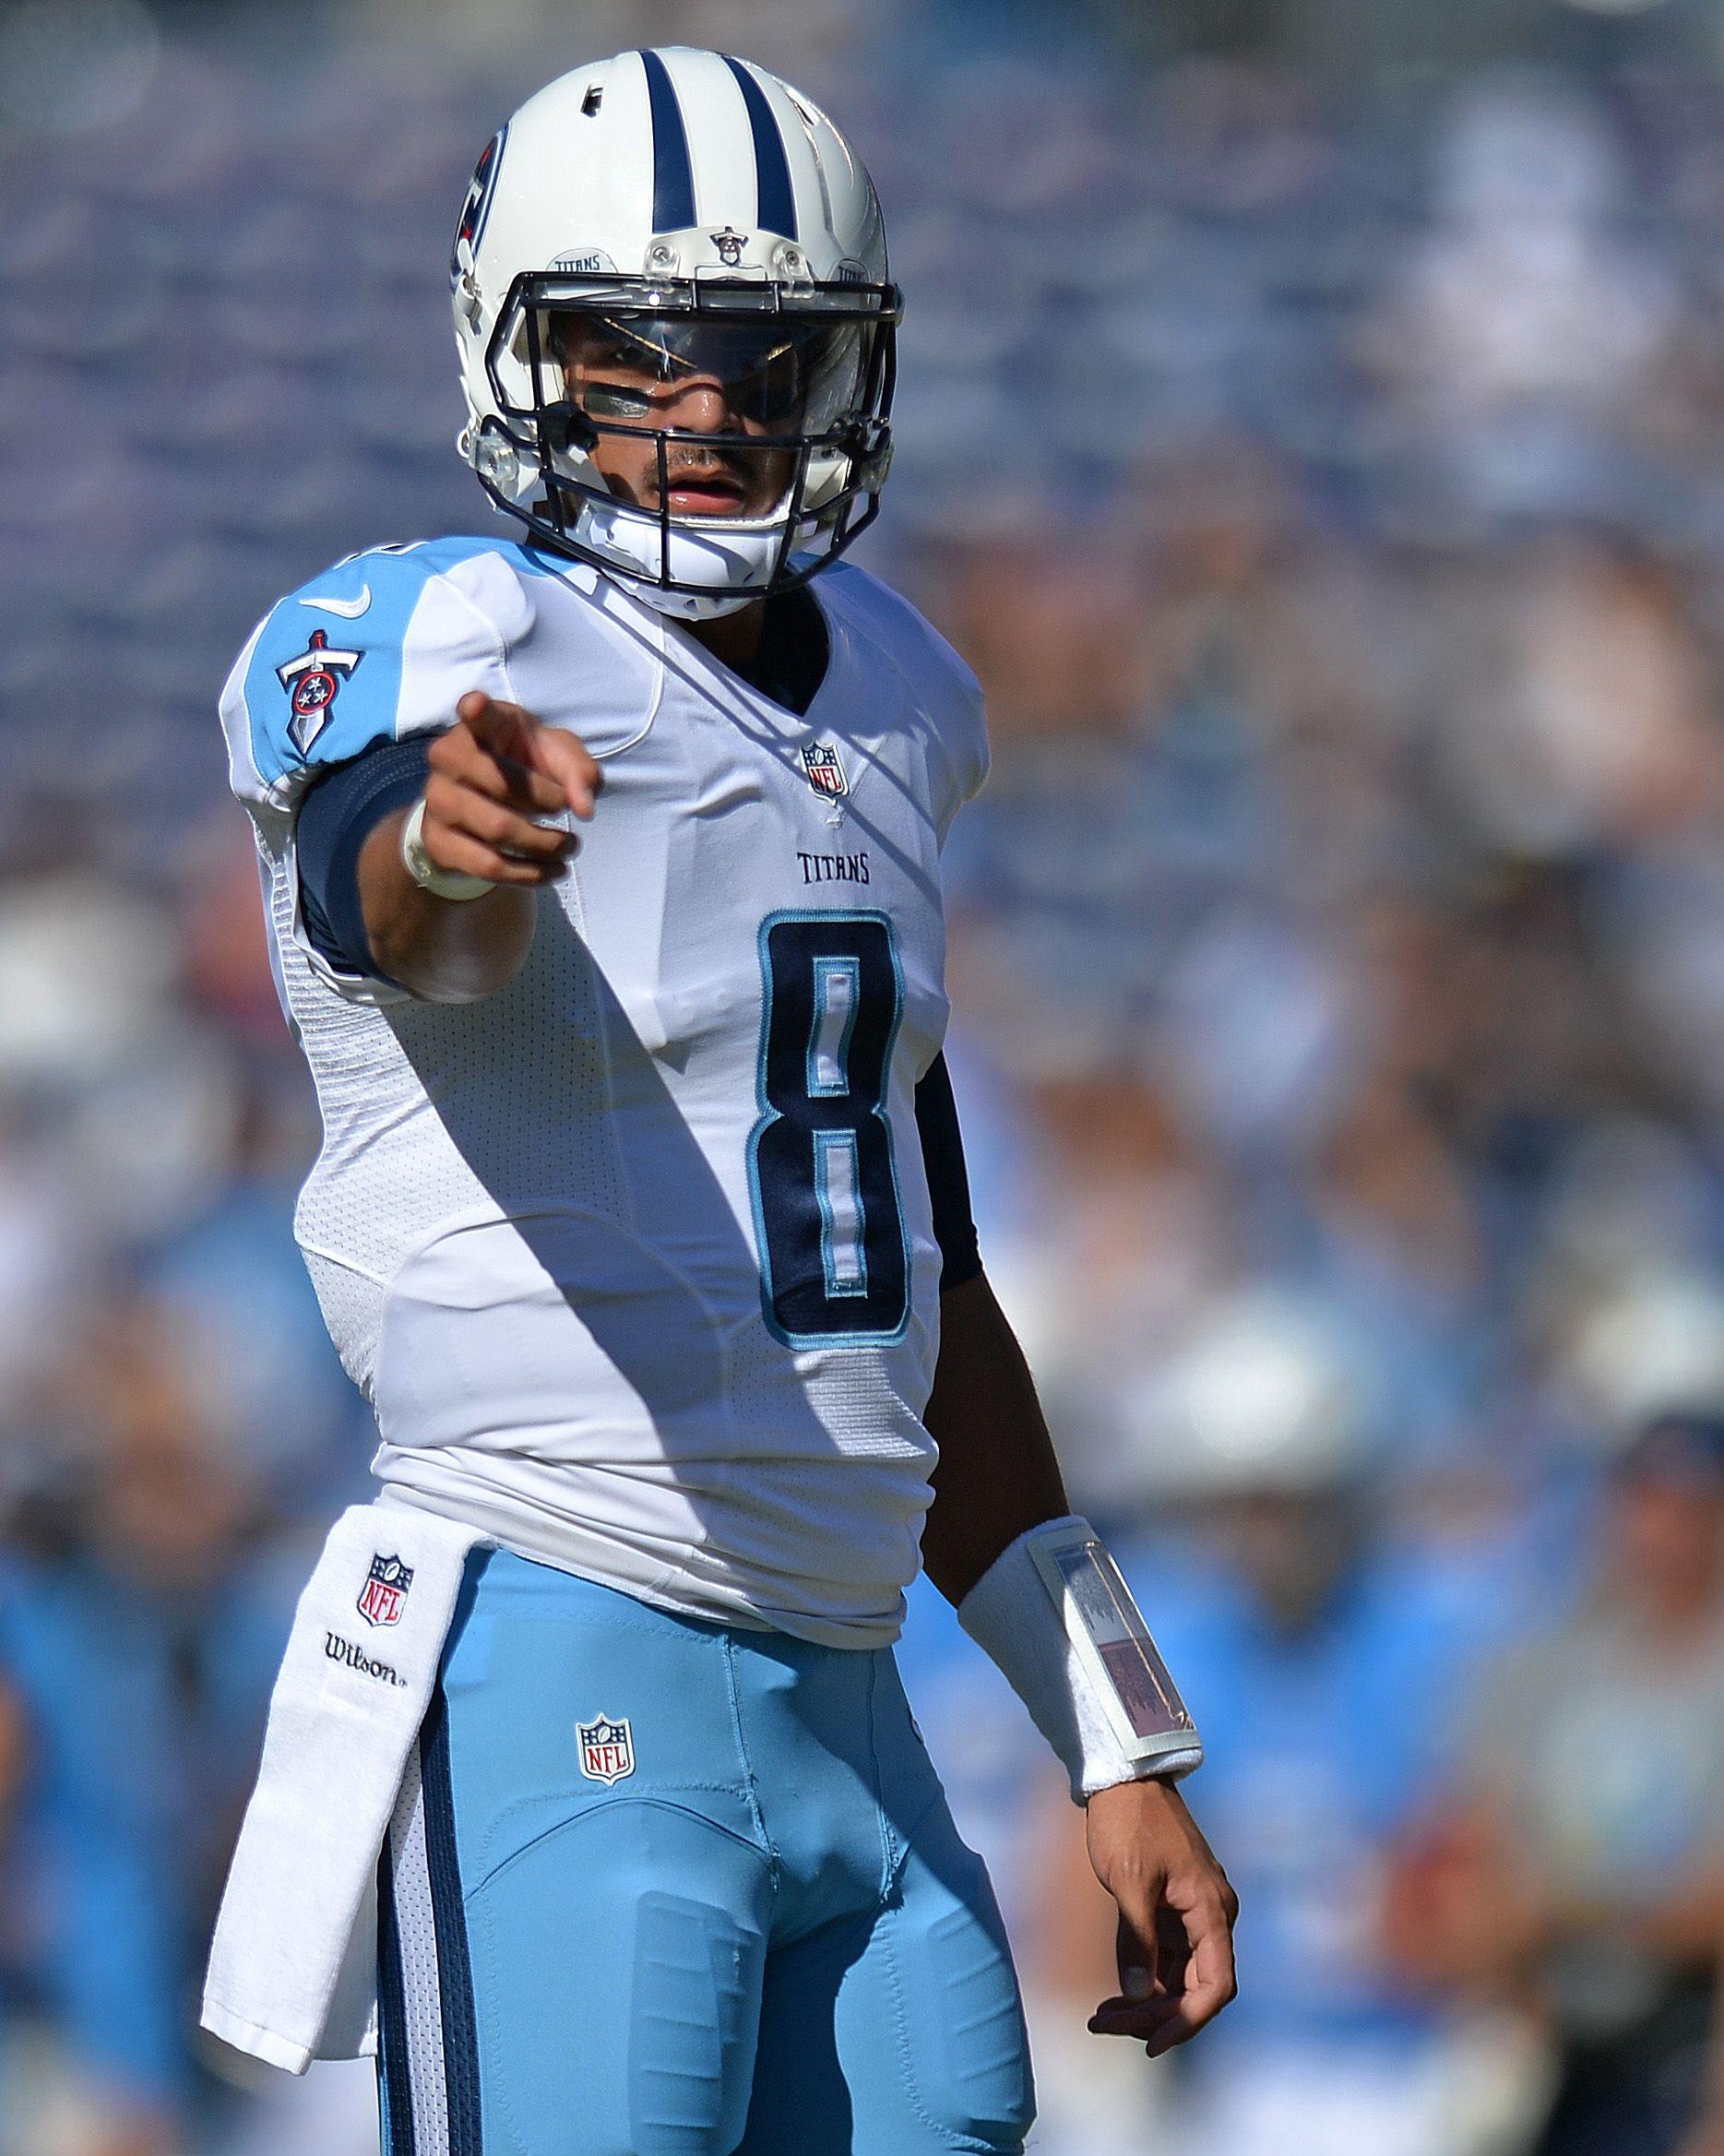 NFL power rankings: Titans, Panthers make big moves after